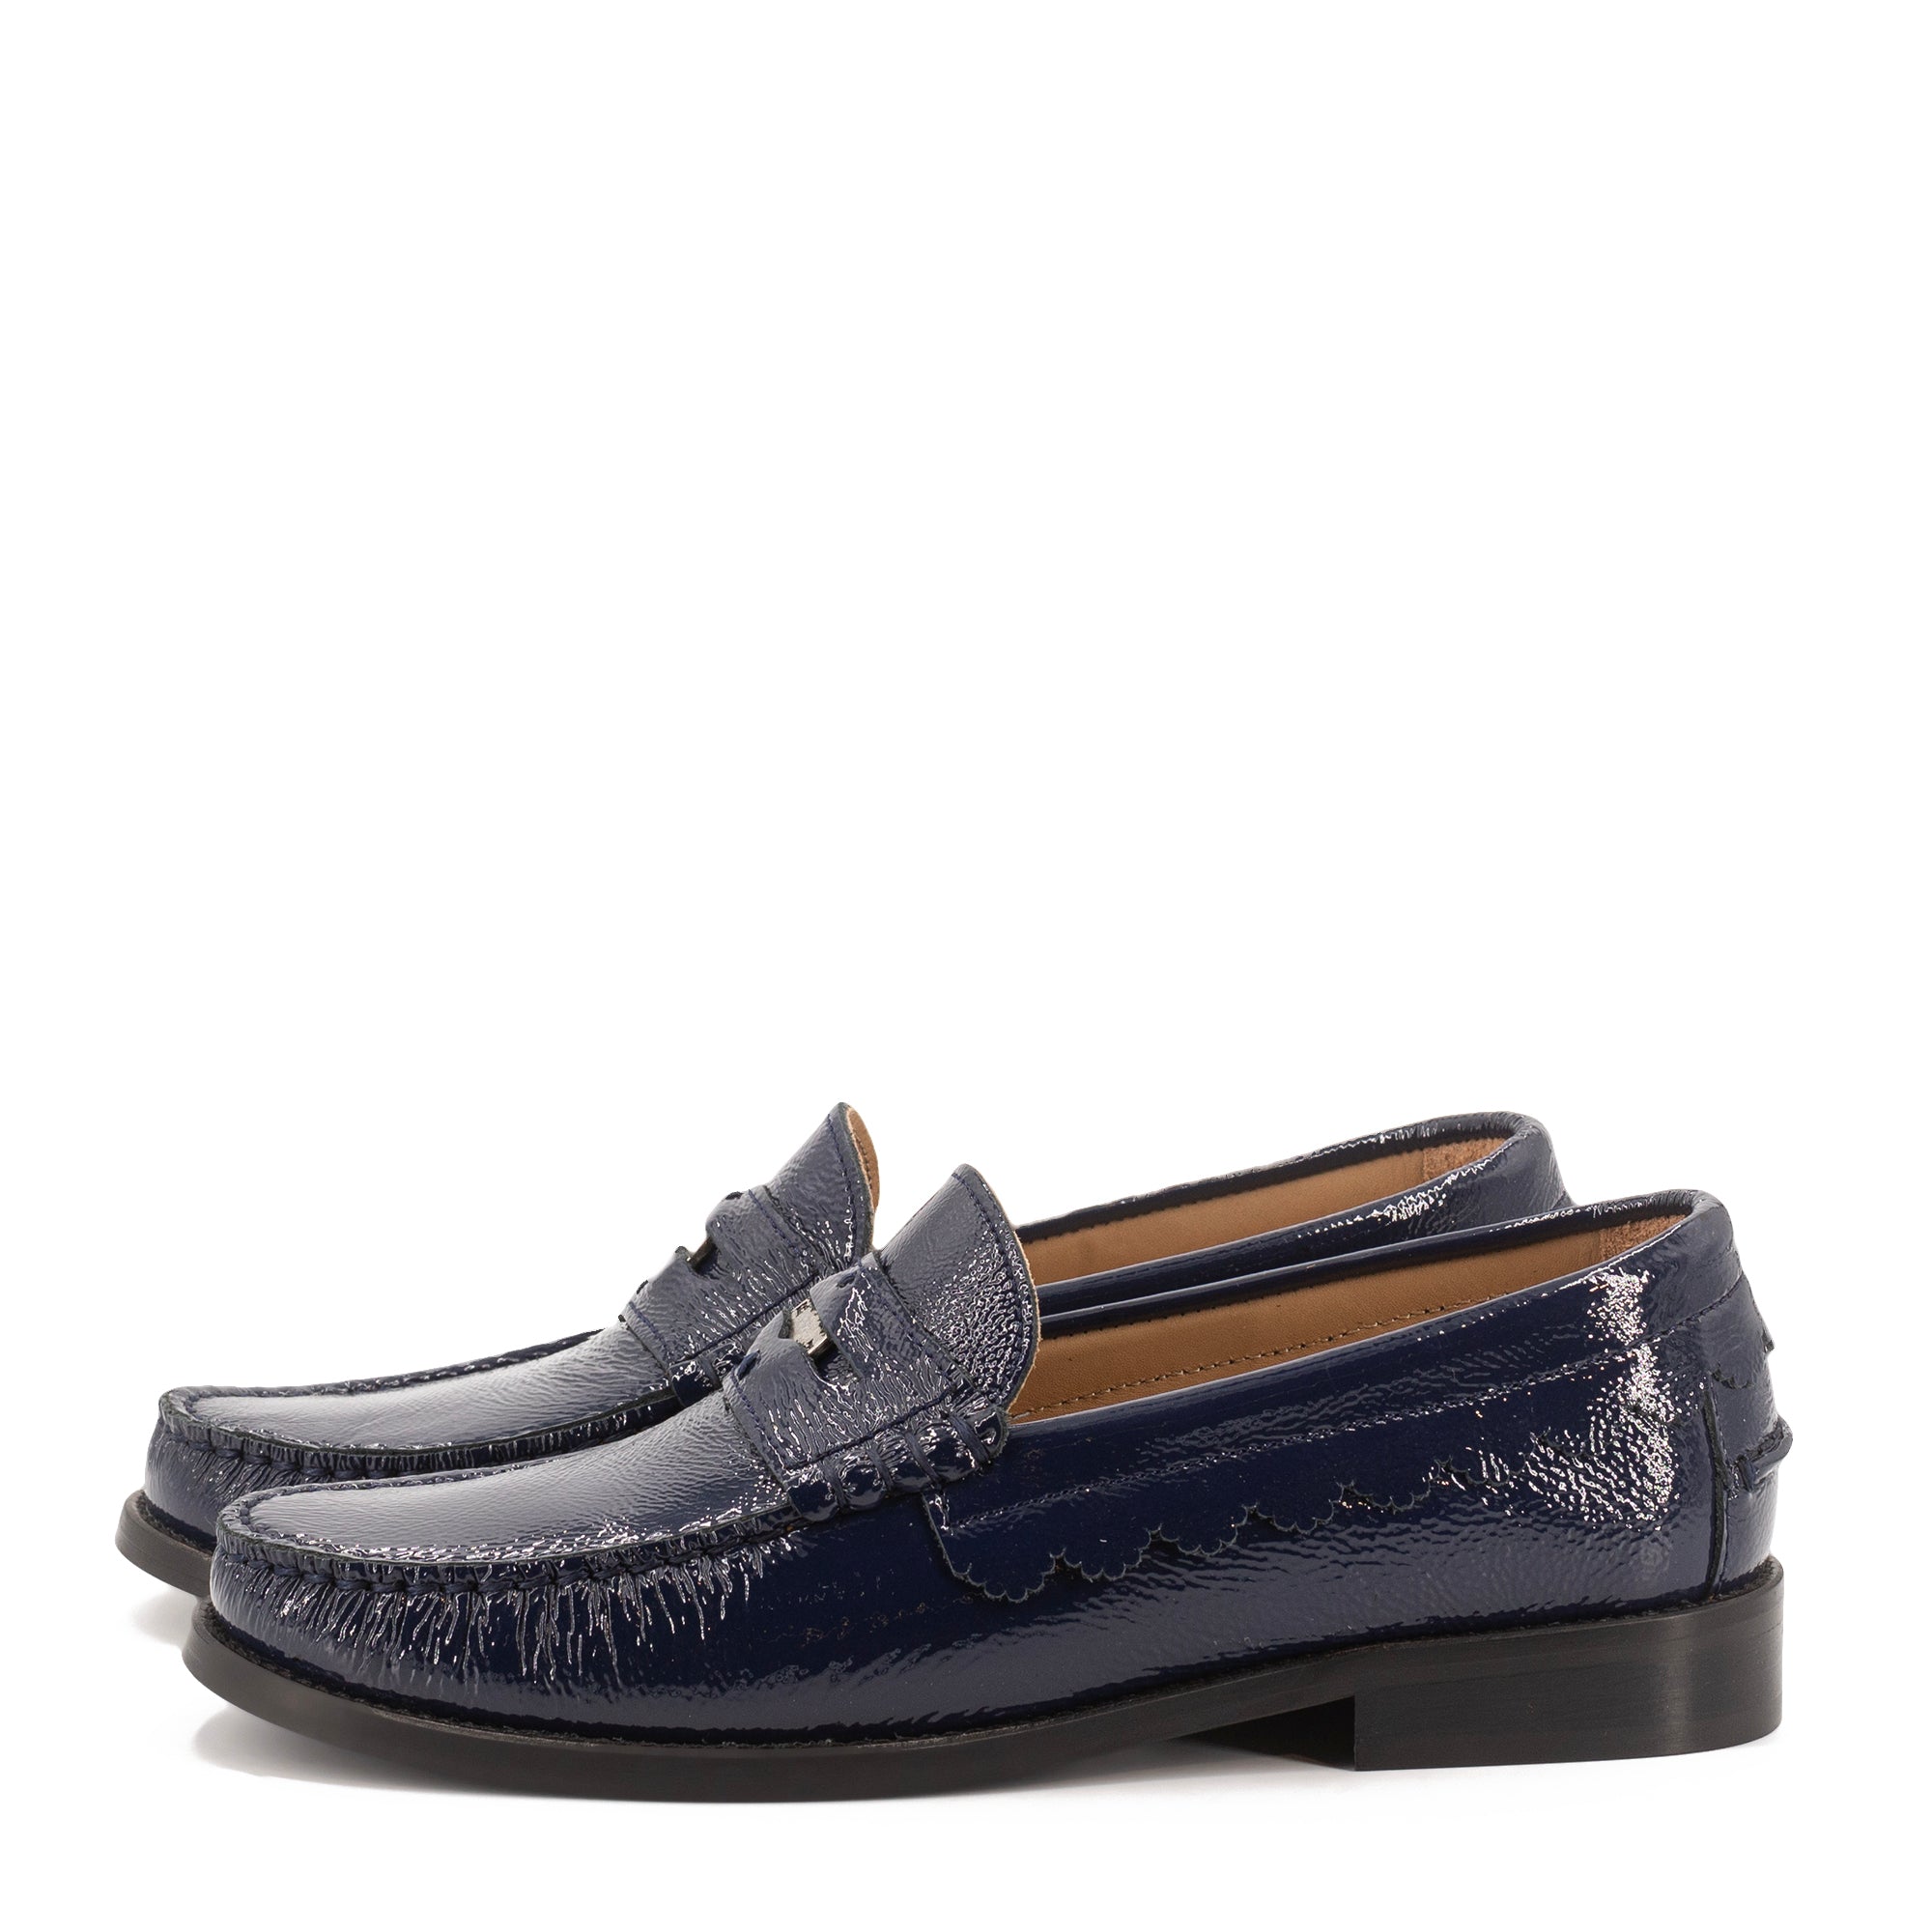 COIN BLUE PATENT LEATHER LOAFERS